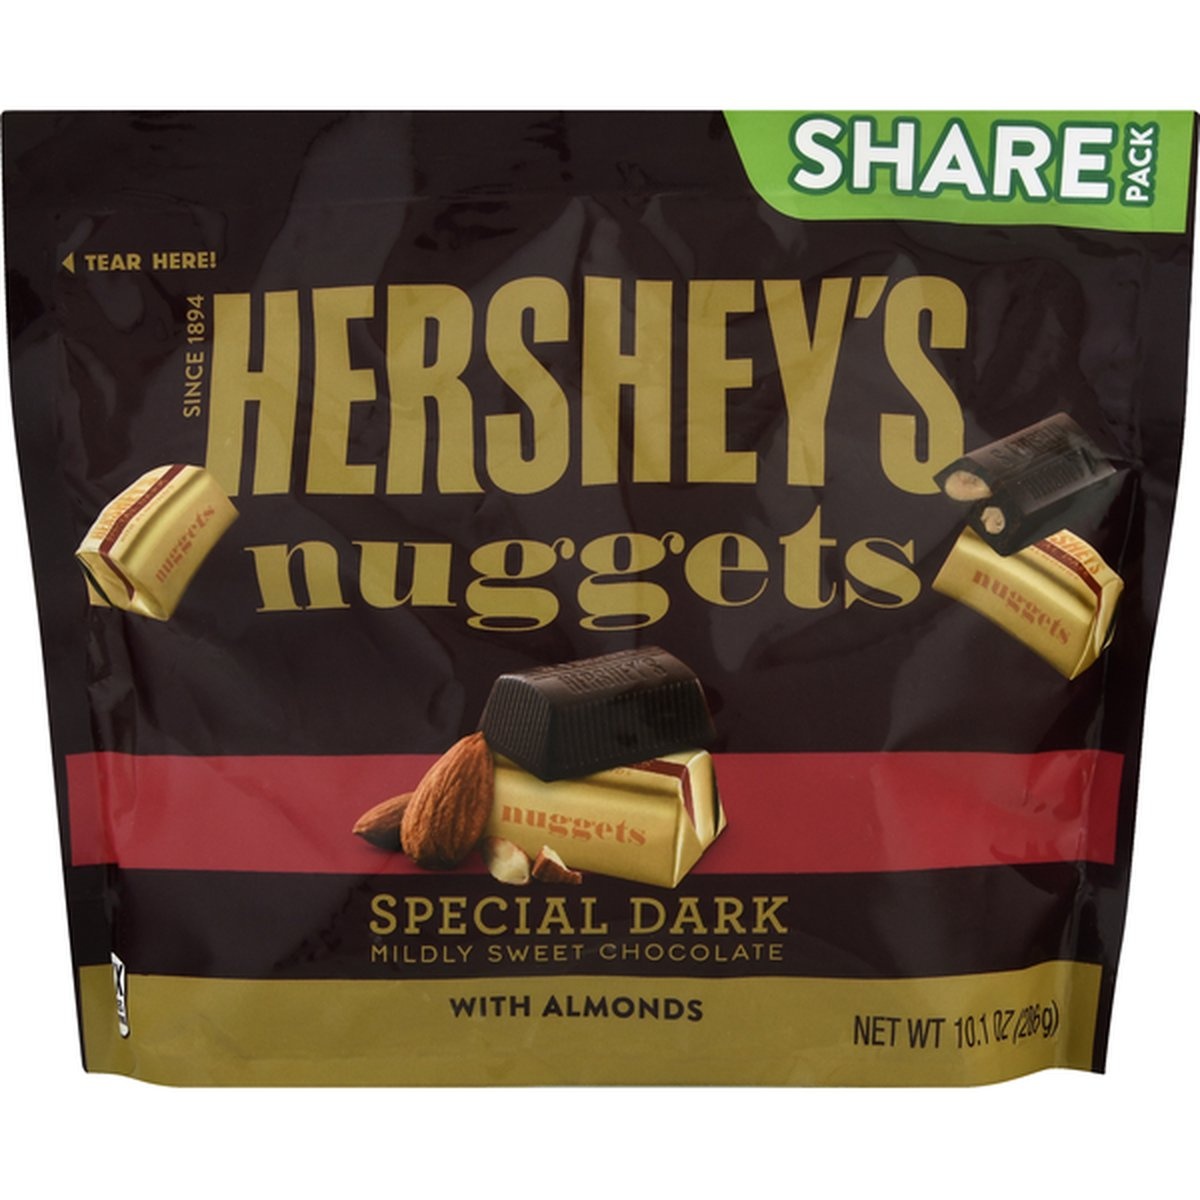 slide 1 of 1, Hershey Nuggets, With Almonds, Special Dark, Mildly Sweet Chocolate, Share Pack, 10.1 oz